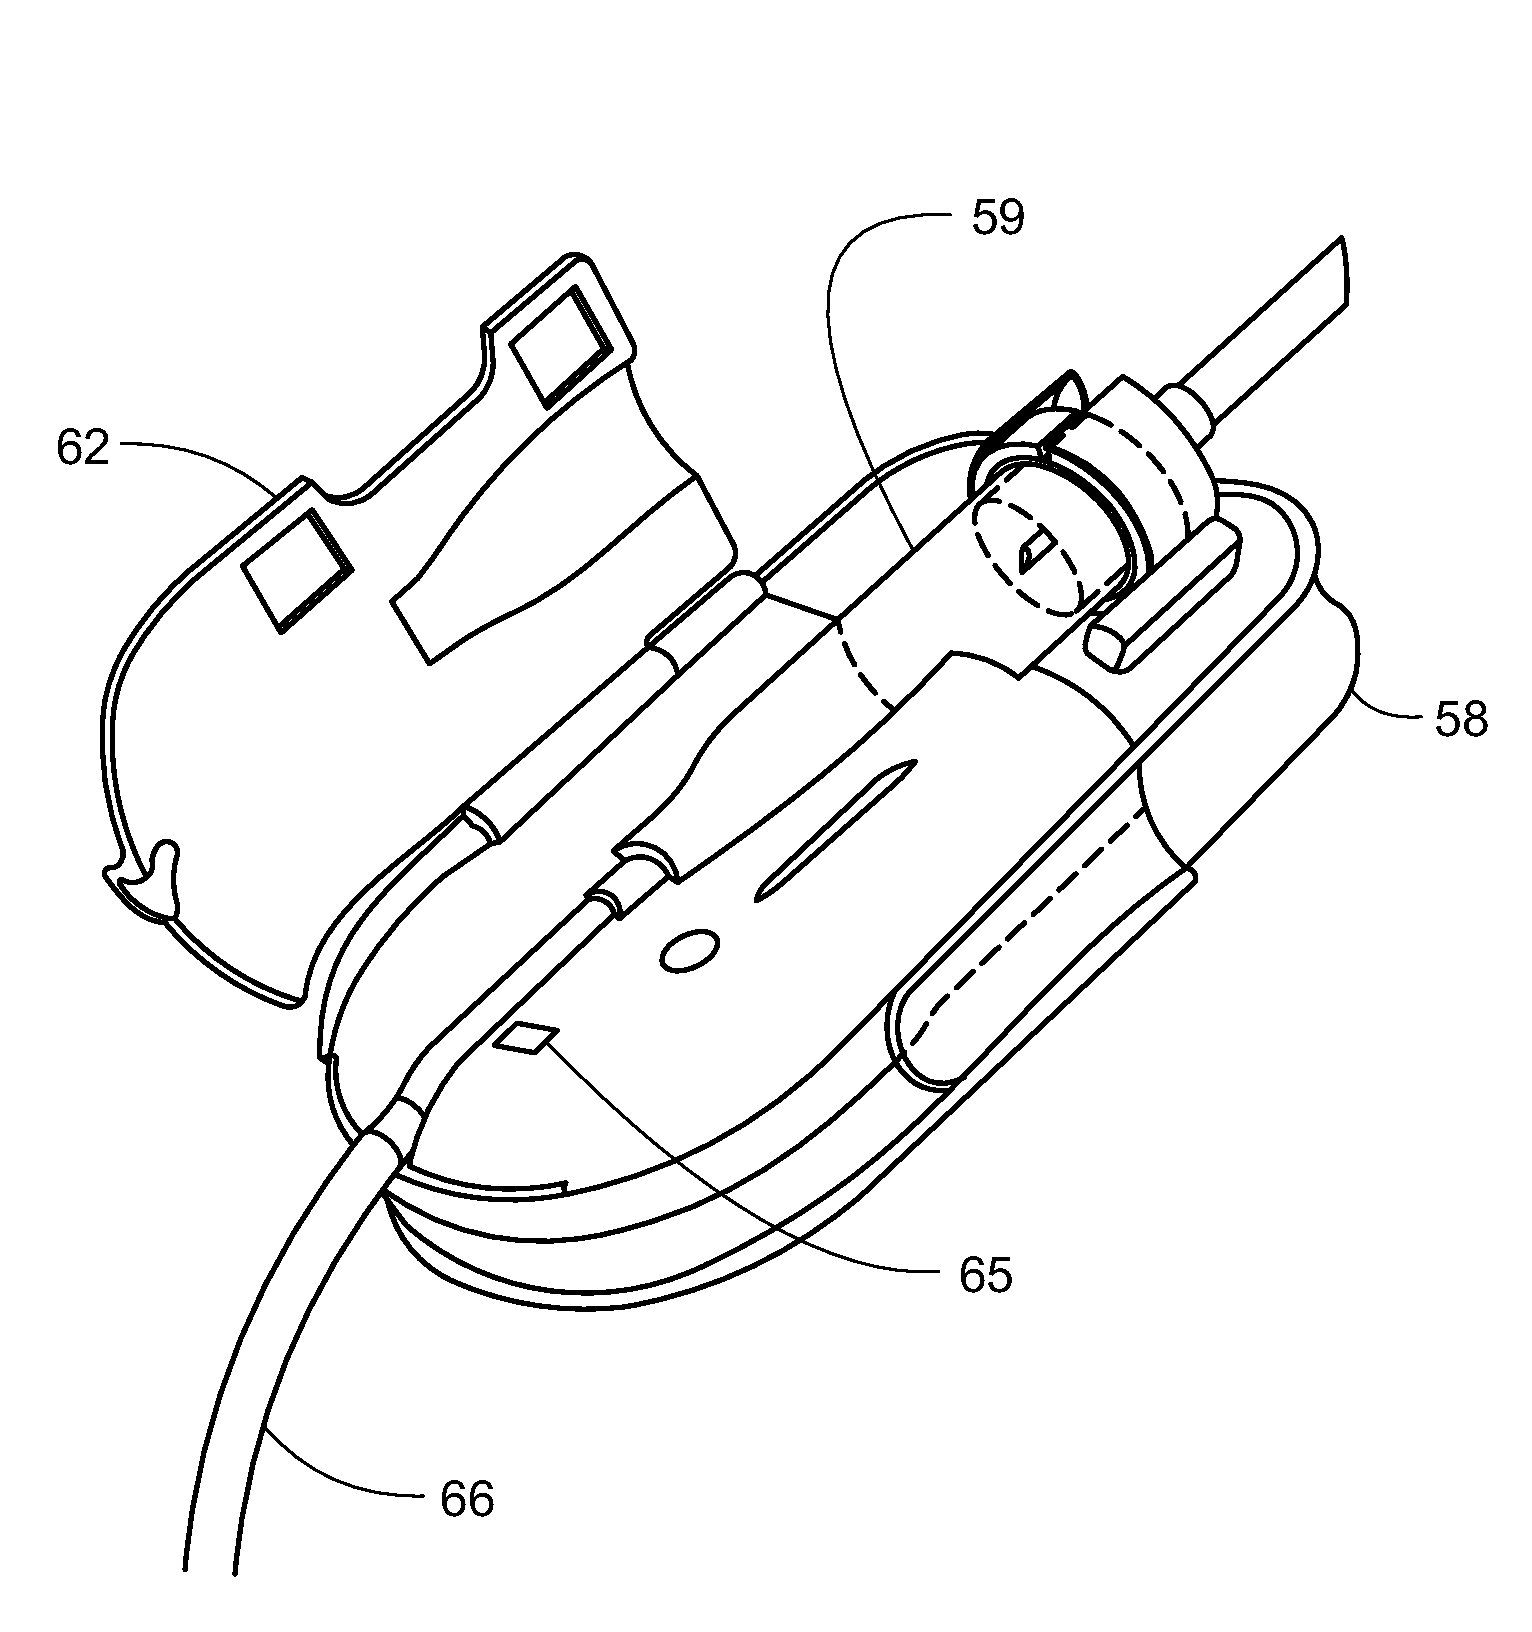 System, Method, and Apparatus for Infusing Fluid